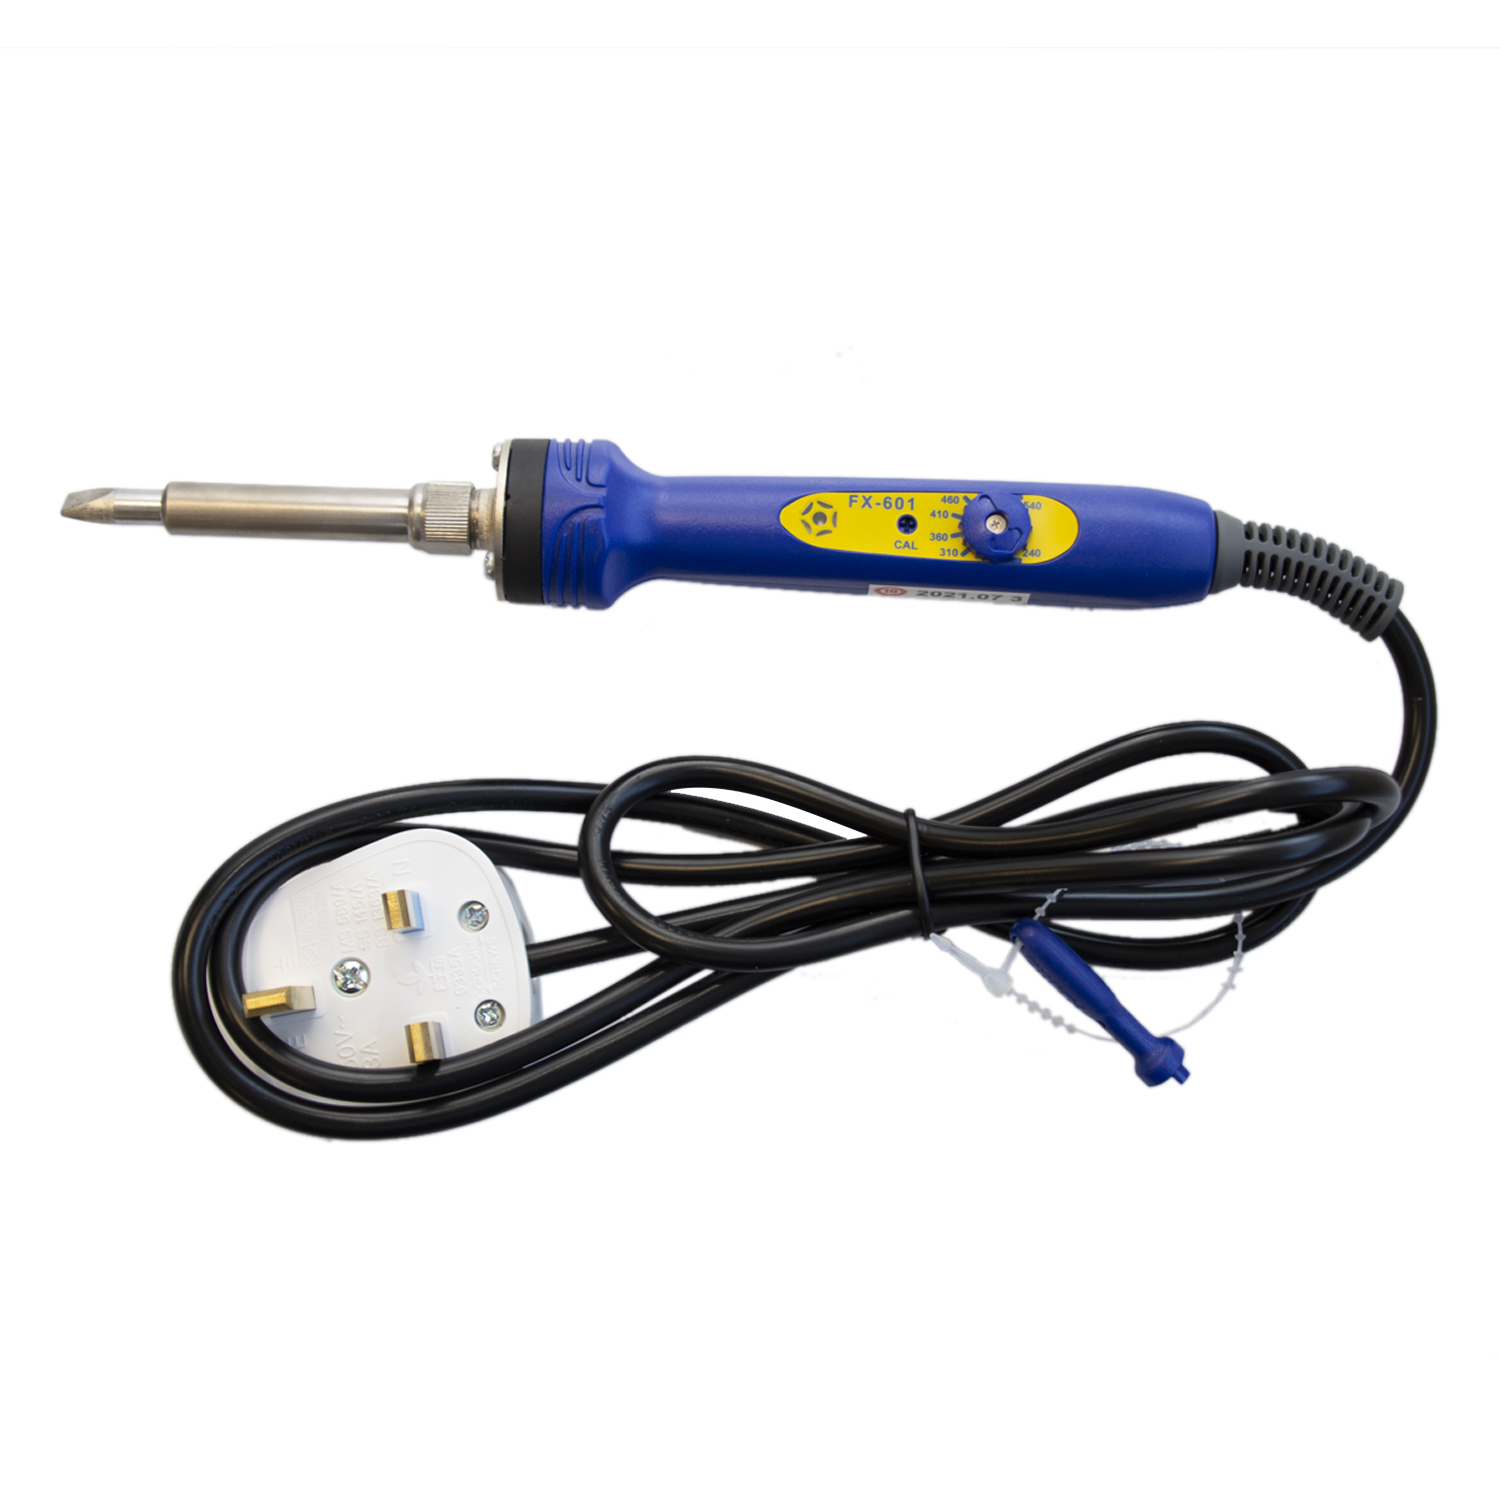 Hakko soldering iron FX601 Dial type temp-control for stained glass Japan new 